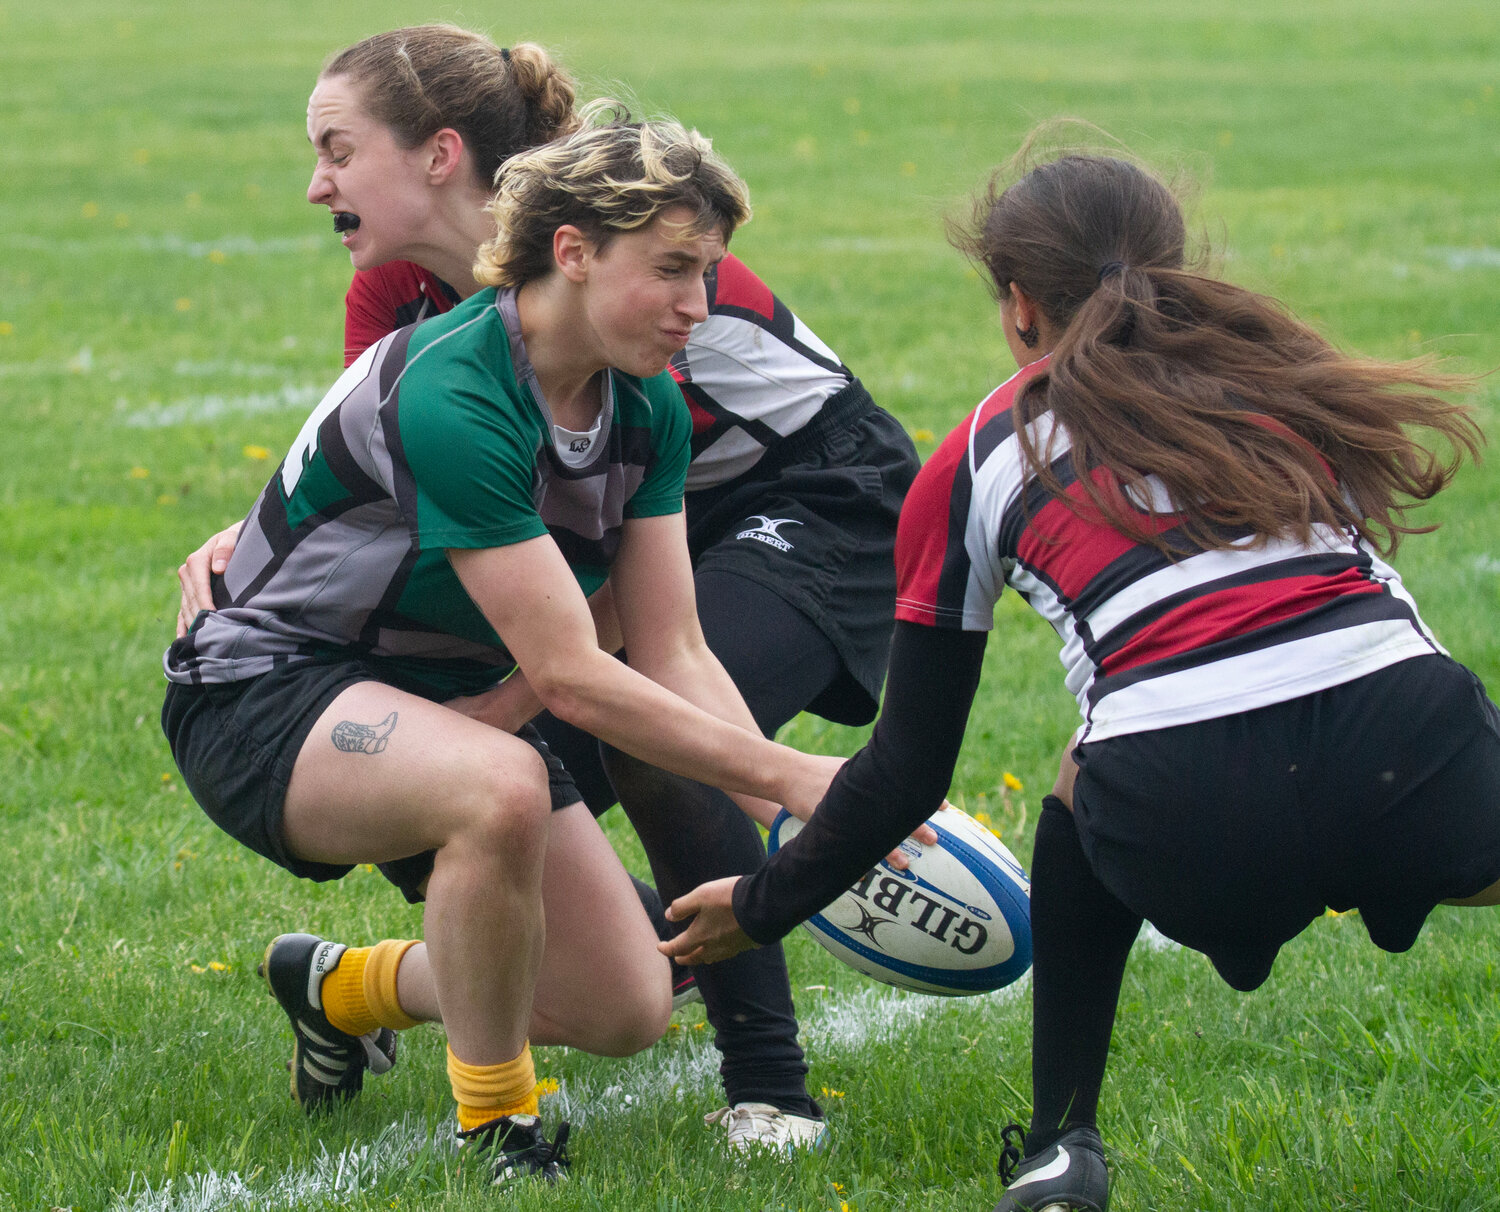 UVM’s Mack “Myth” Gamache reaches in for a try.